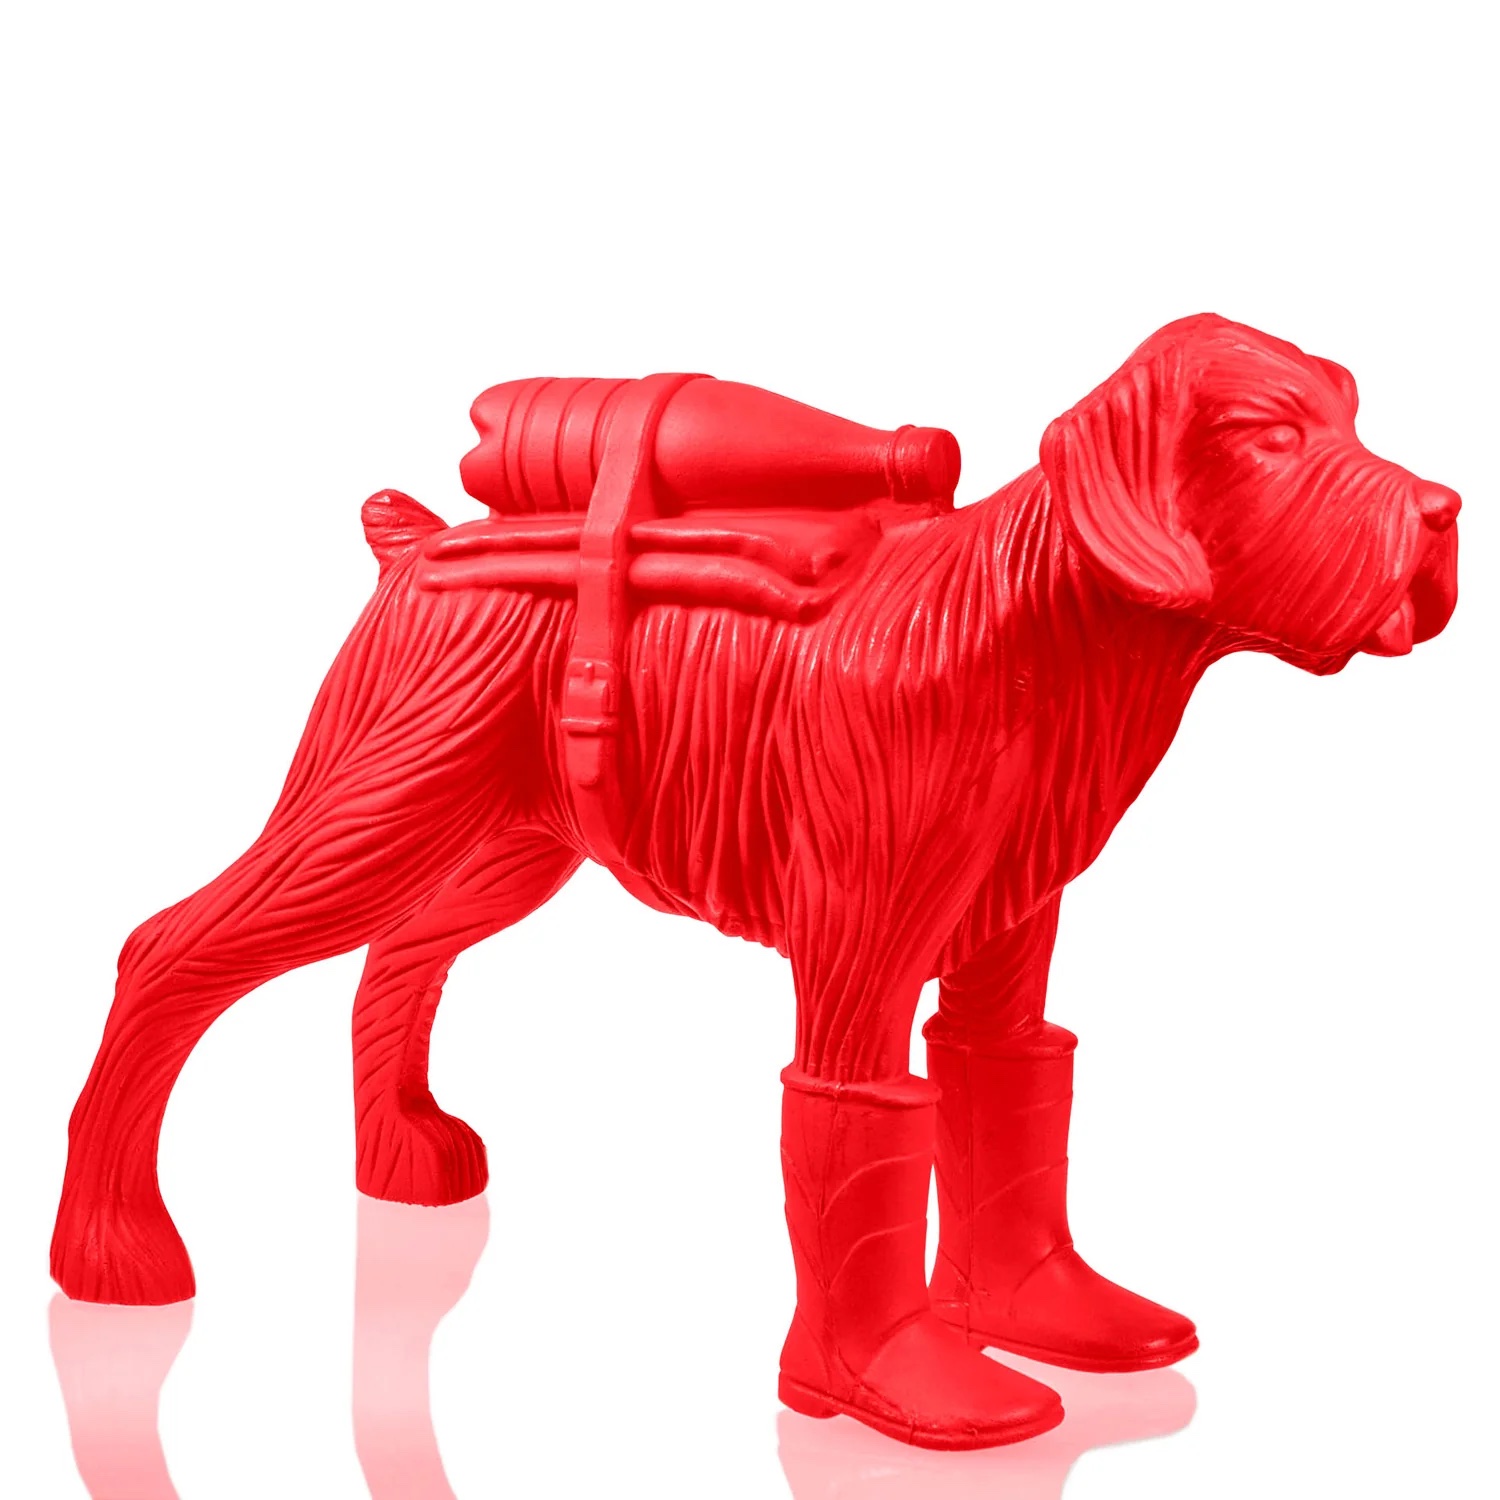 William Sweetlove | Cloned Schnauzer with water bottle (red) 2019